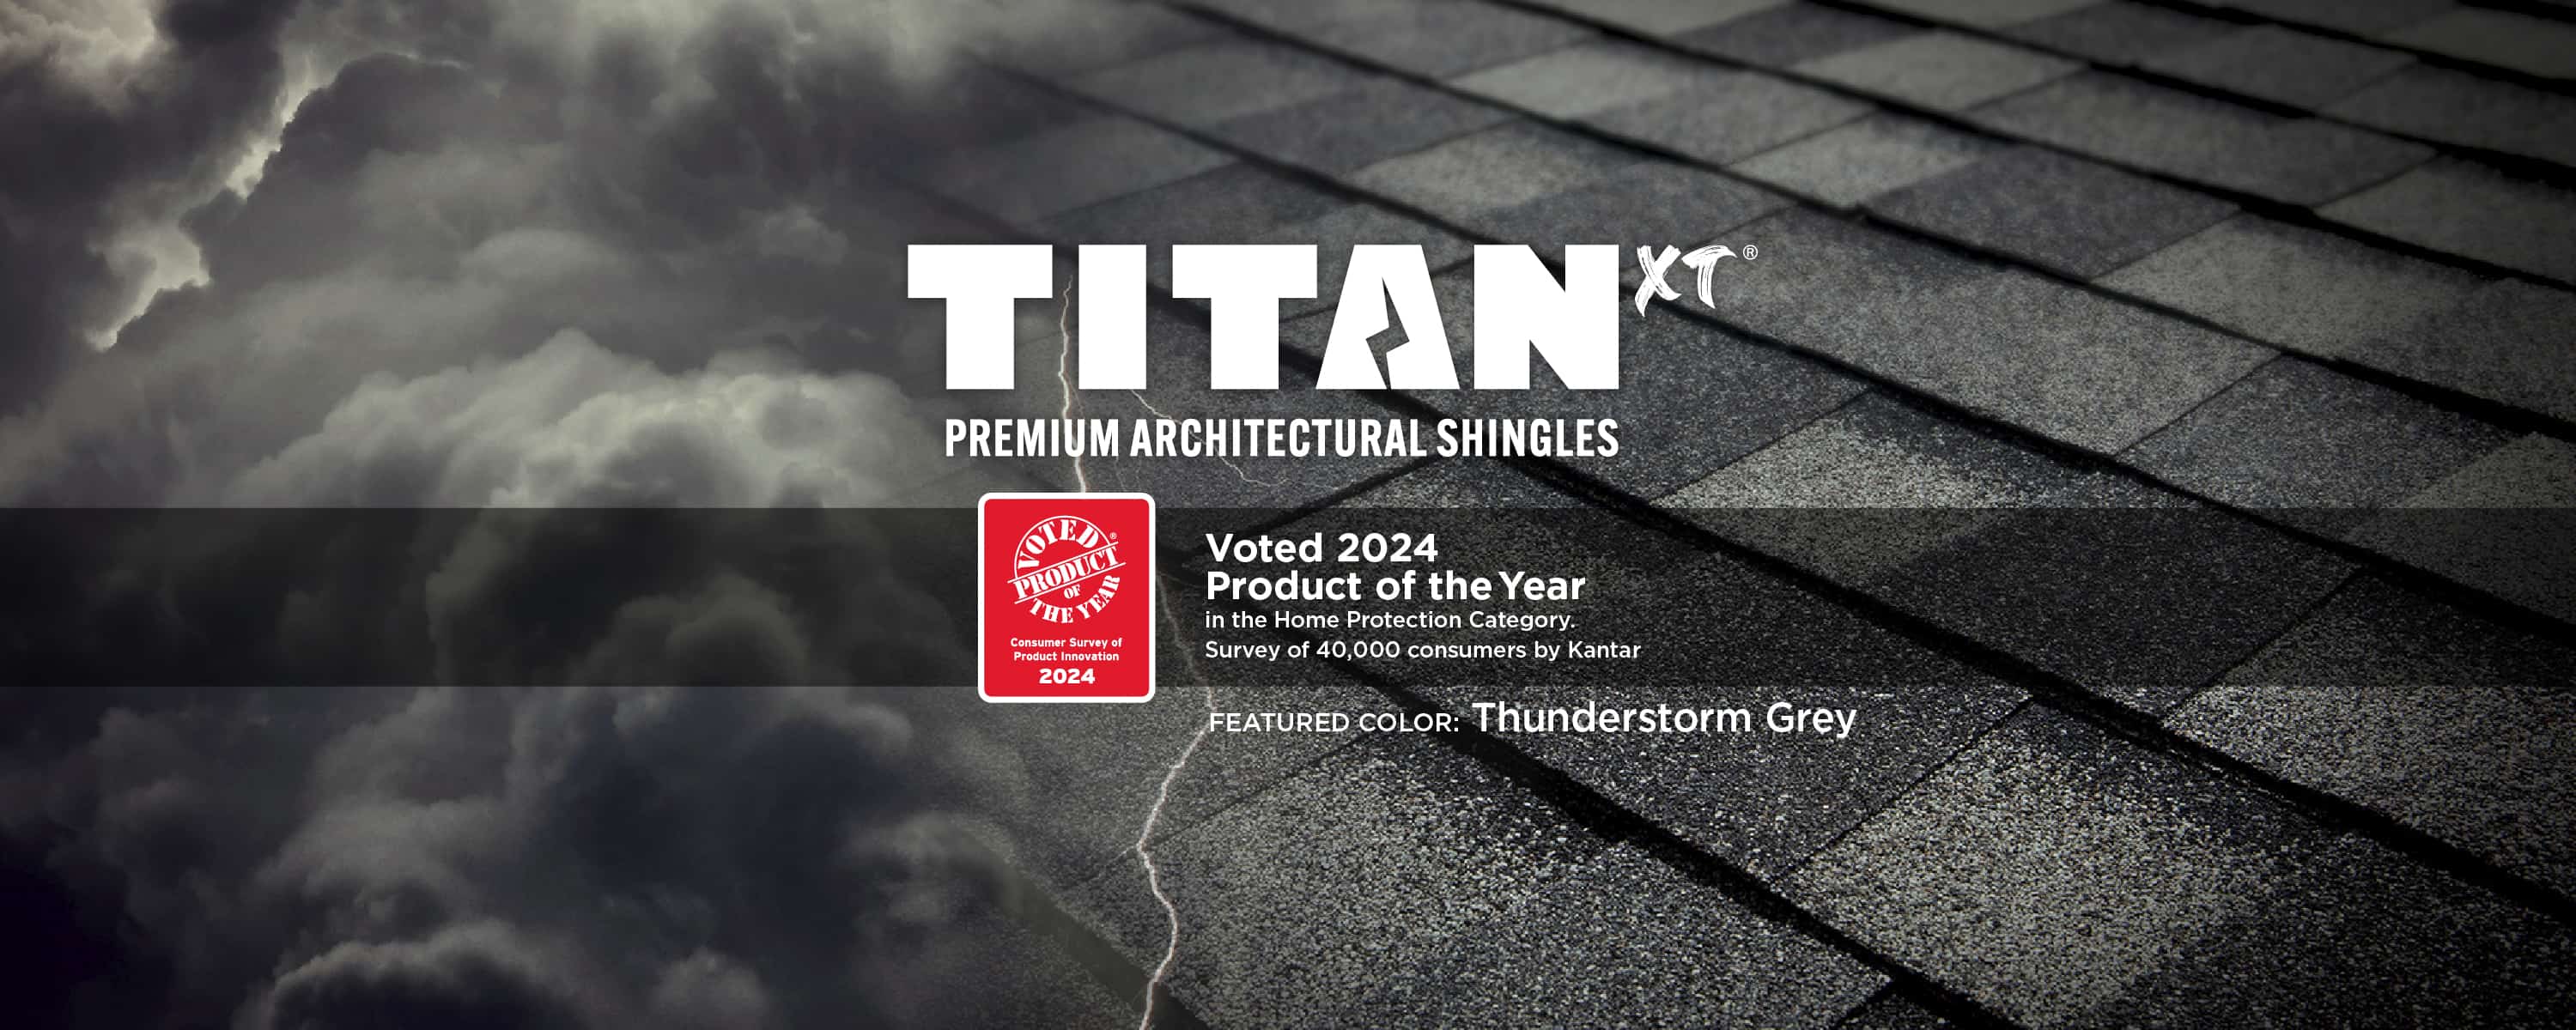 Titan XT 2024 Product of the Year - Thunderstorm Grey